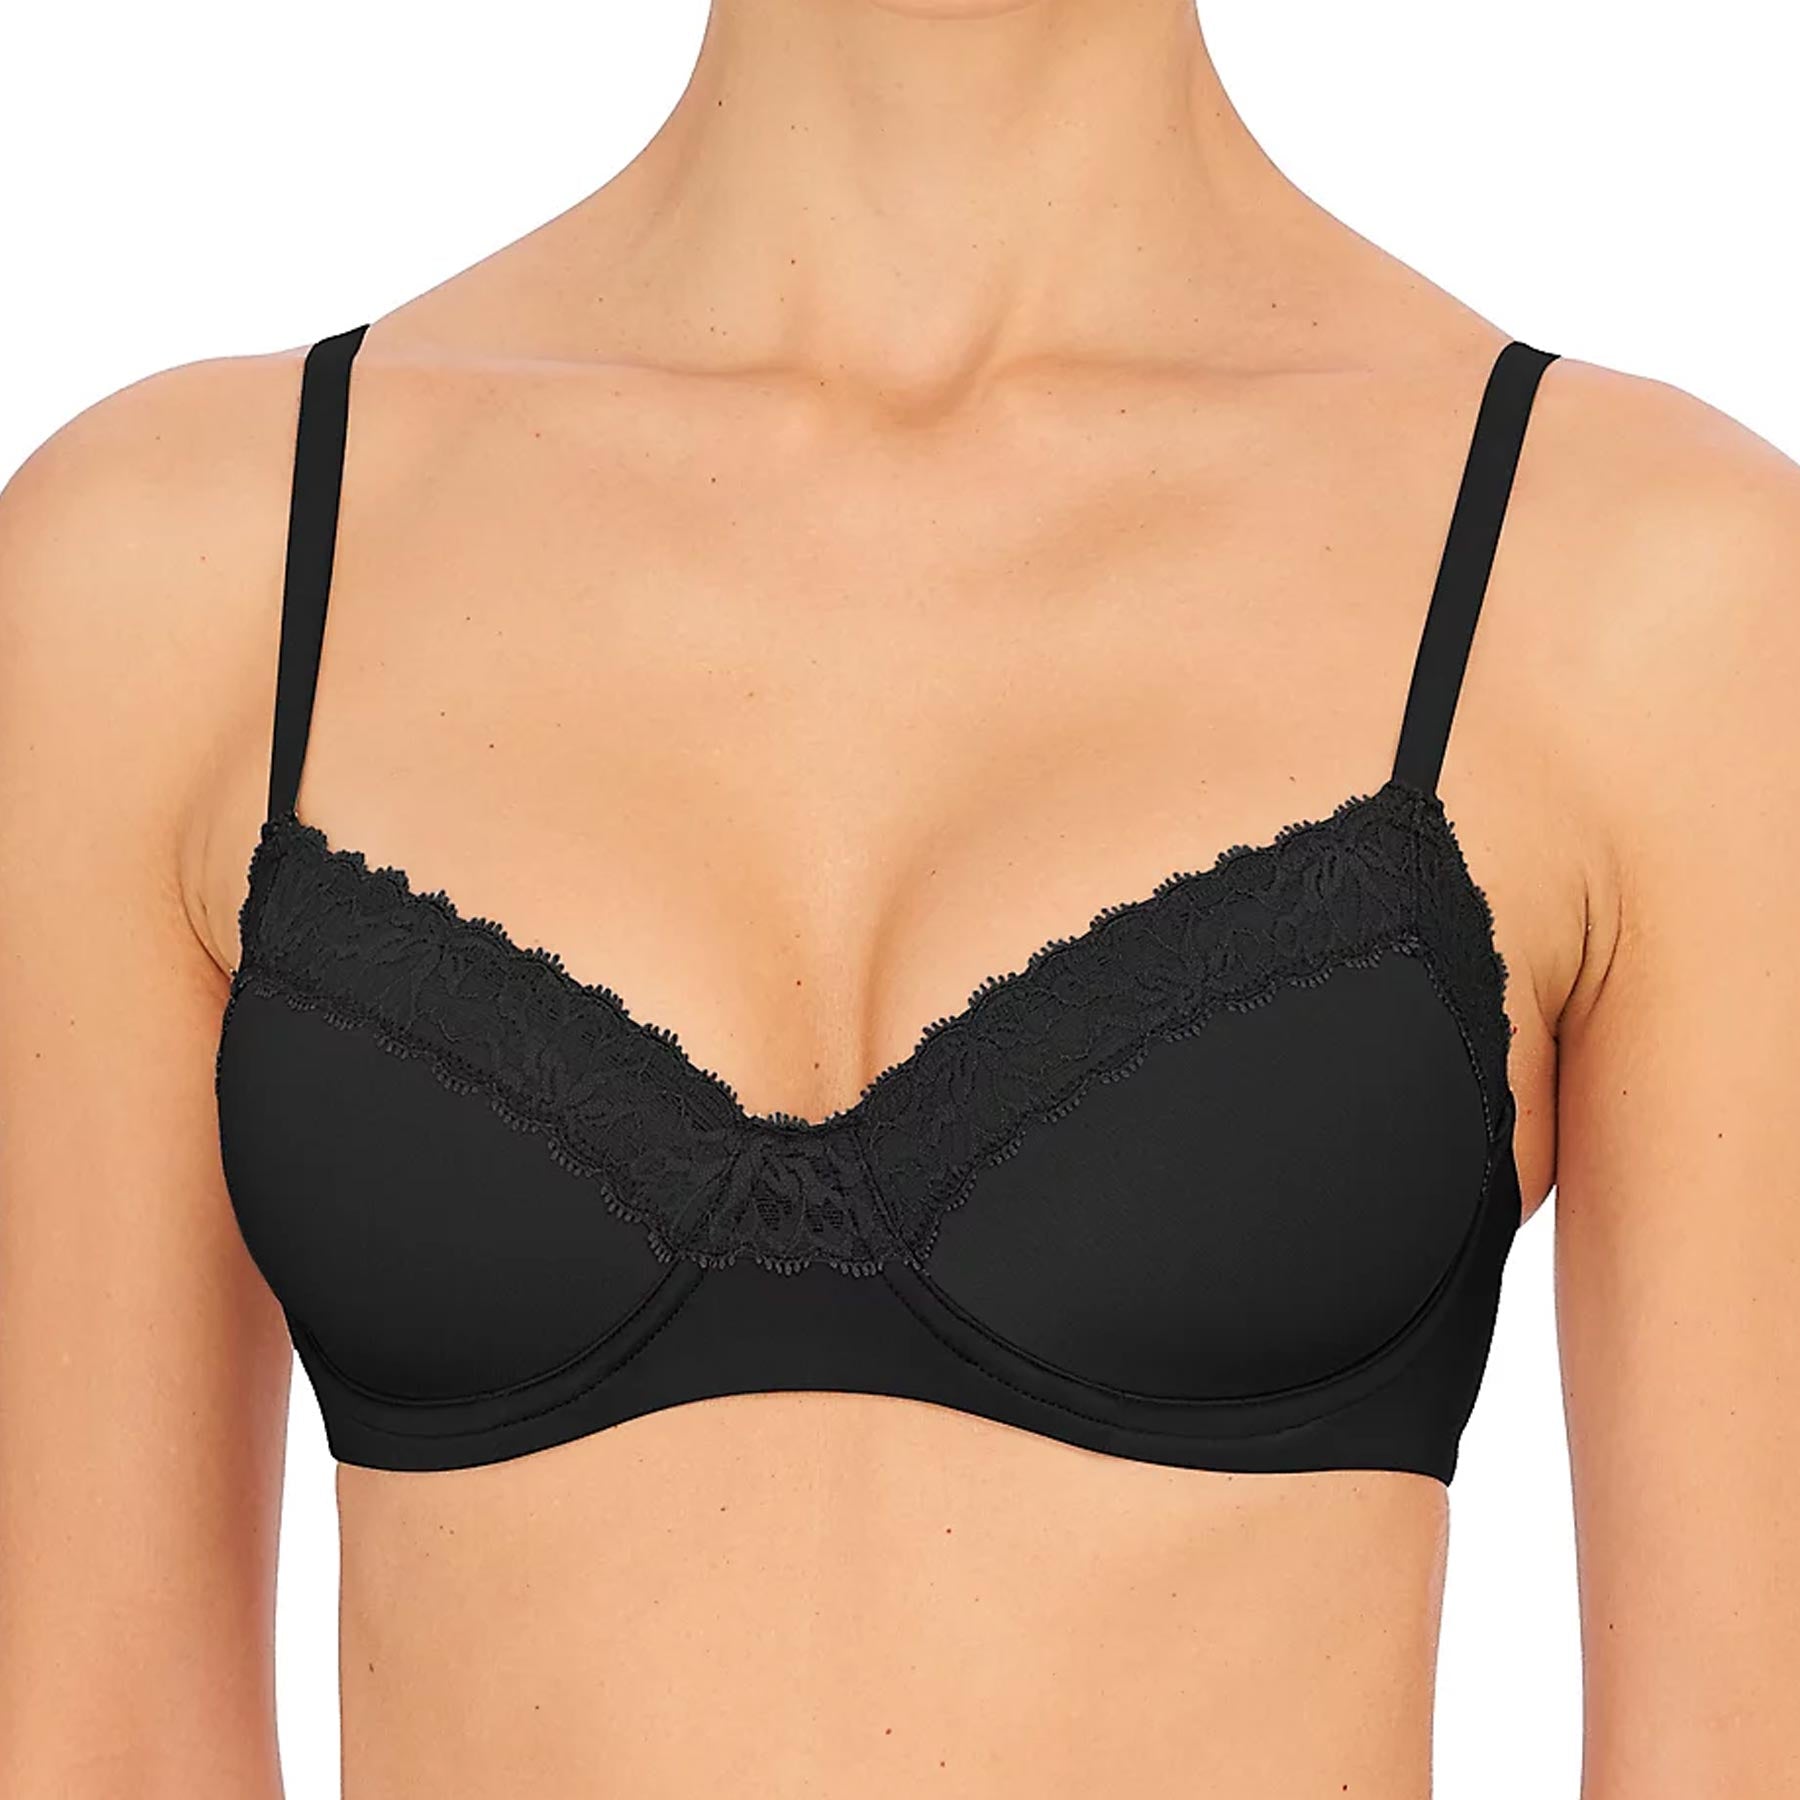 Correct brand/style for breast shape? 32D - Natori » Feathers